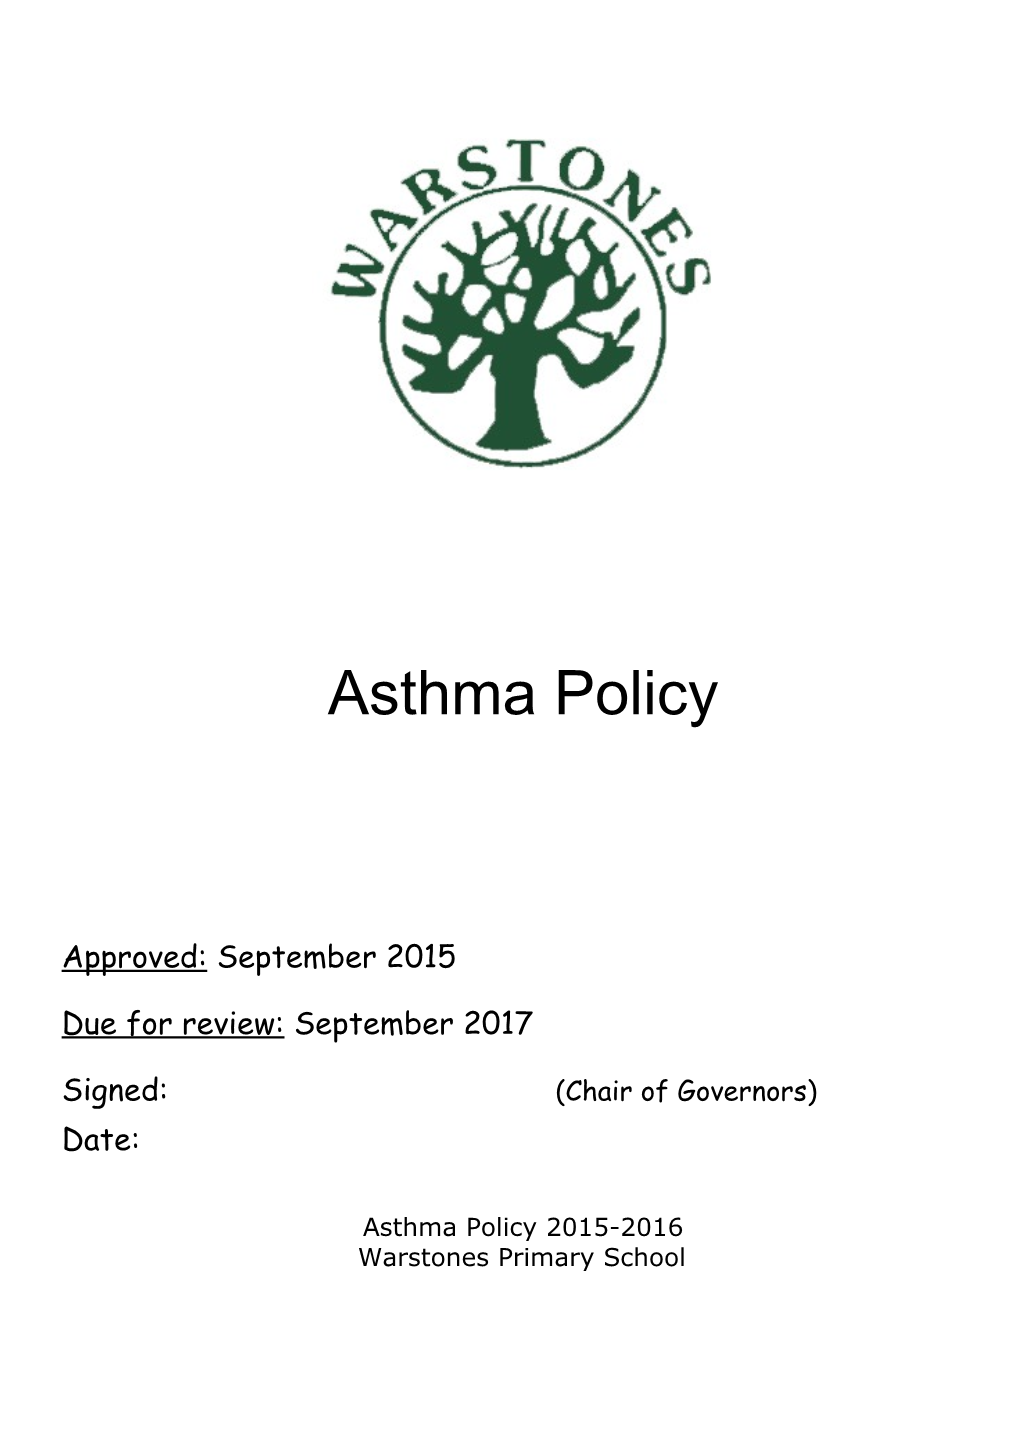 Asthma Policy